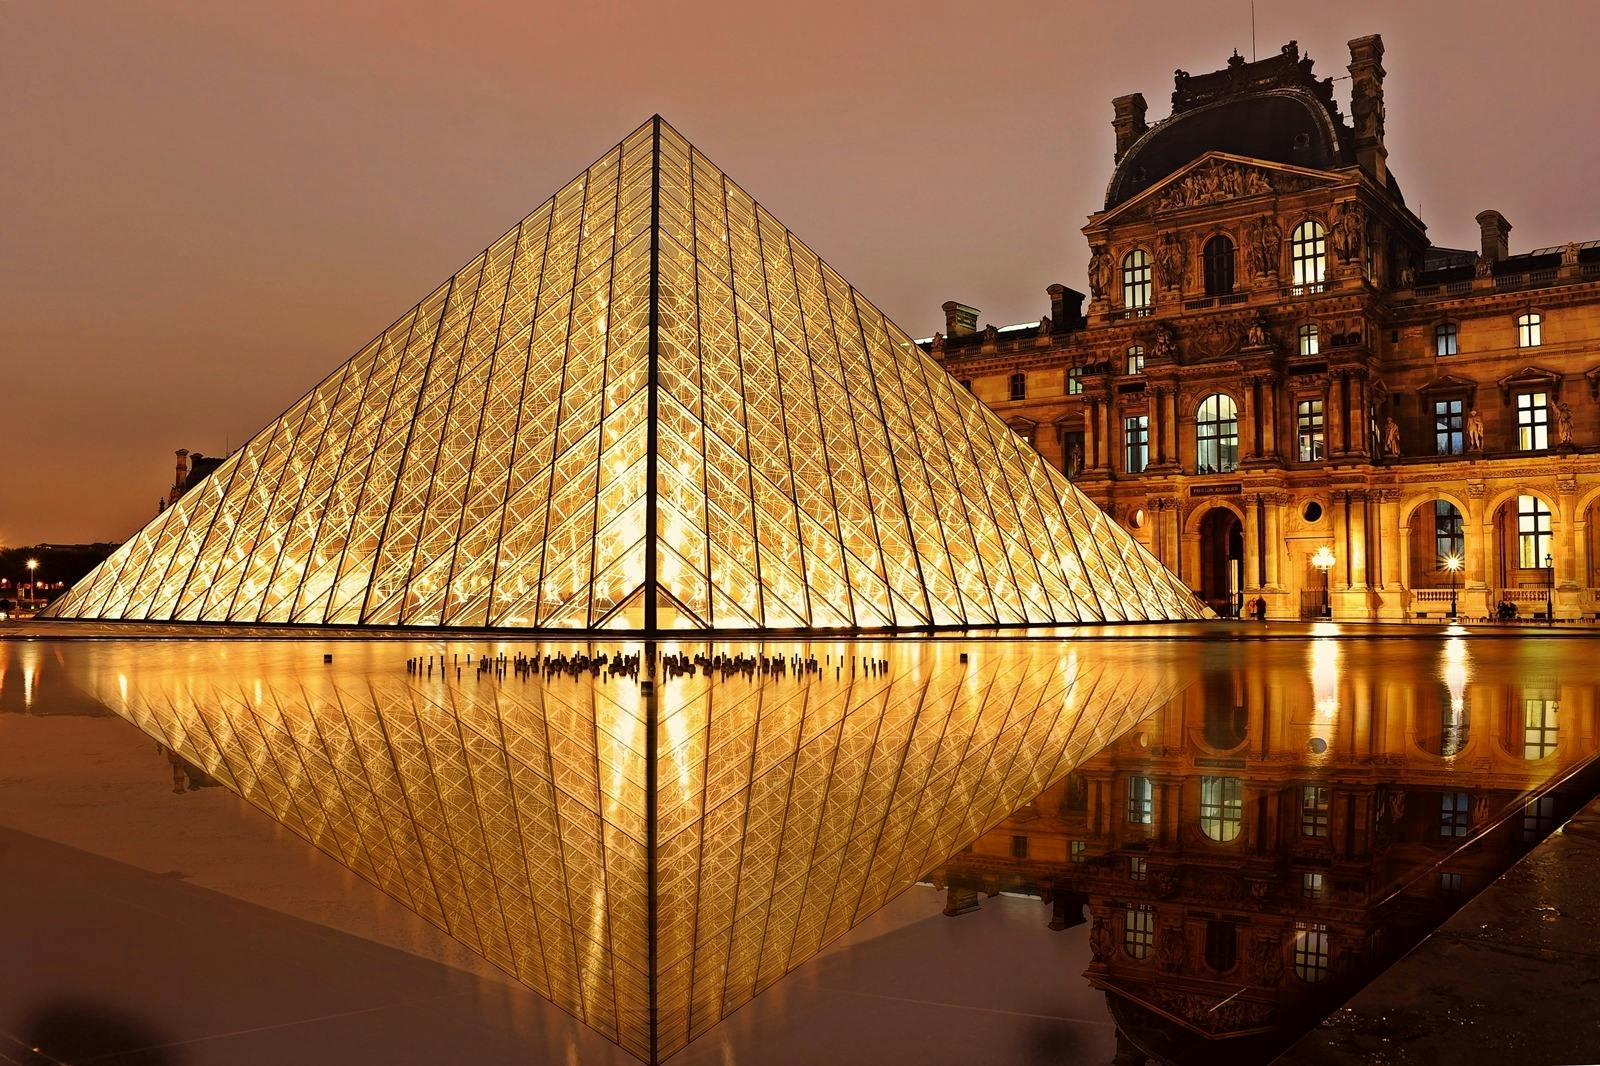 The pyramid entrance in front of the Louvre museum in Paris